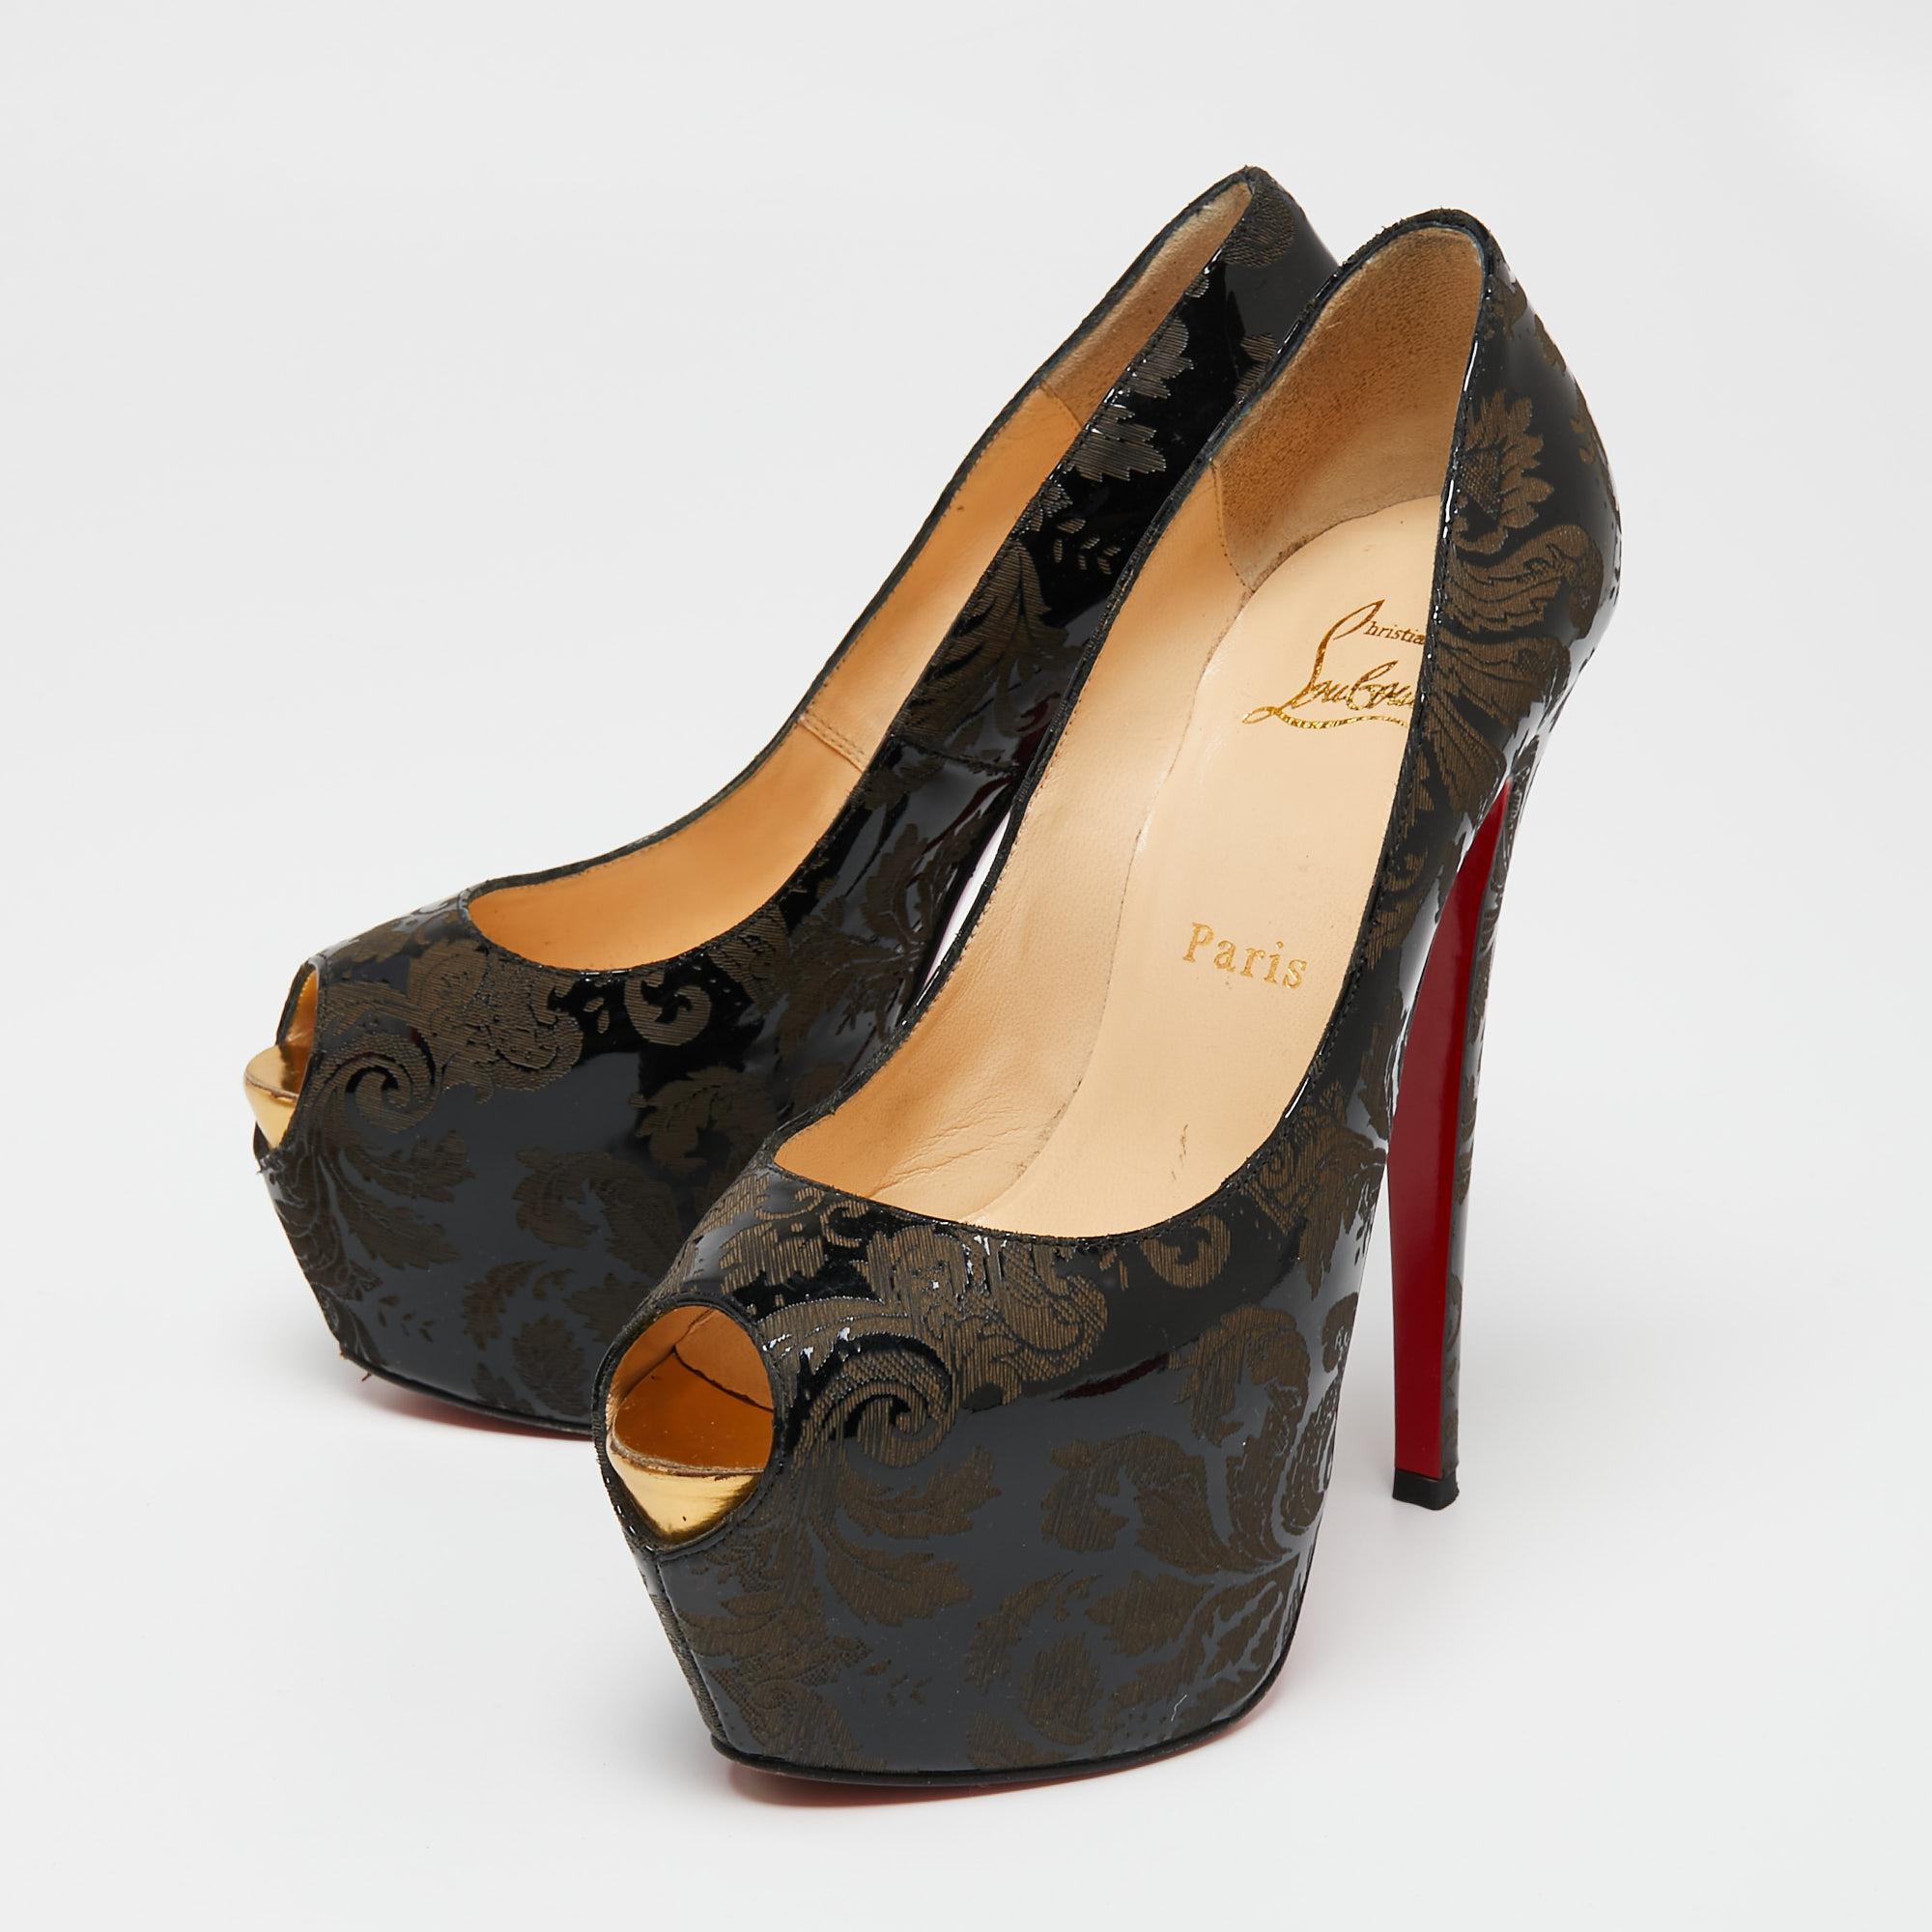 Set on towering heels and crafted with perfection, these Highness pumps from Christian Louboutin are here to elevate your style and take it higher! They are created using black-brown patent leather, highlighted with Arabesque detailing. They have